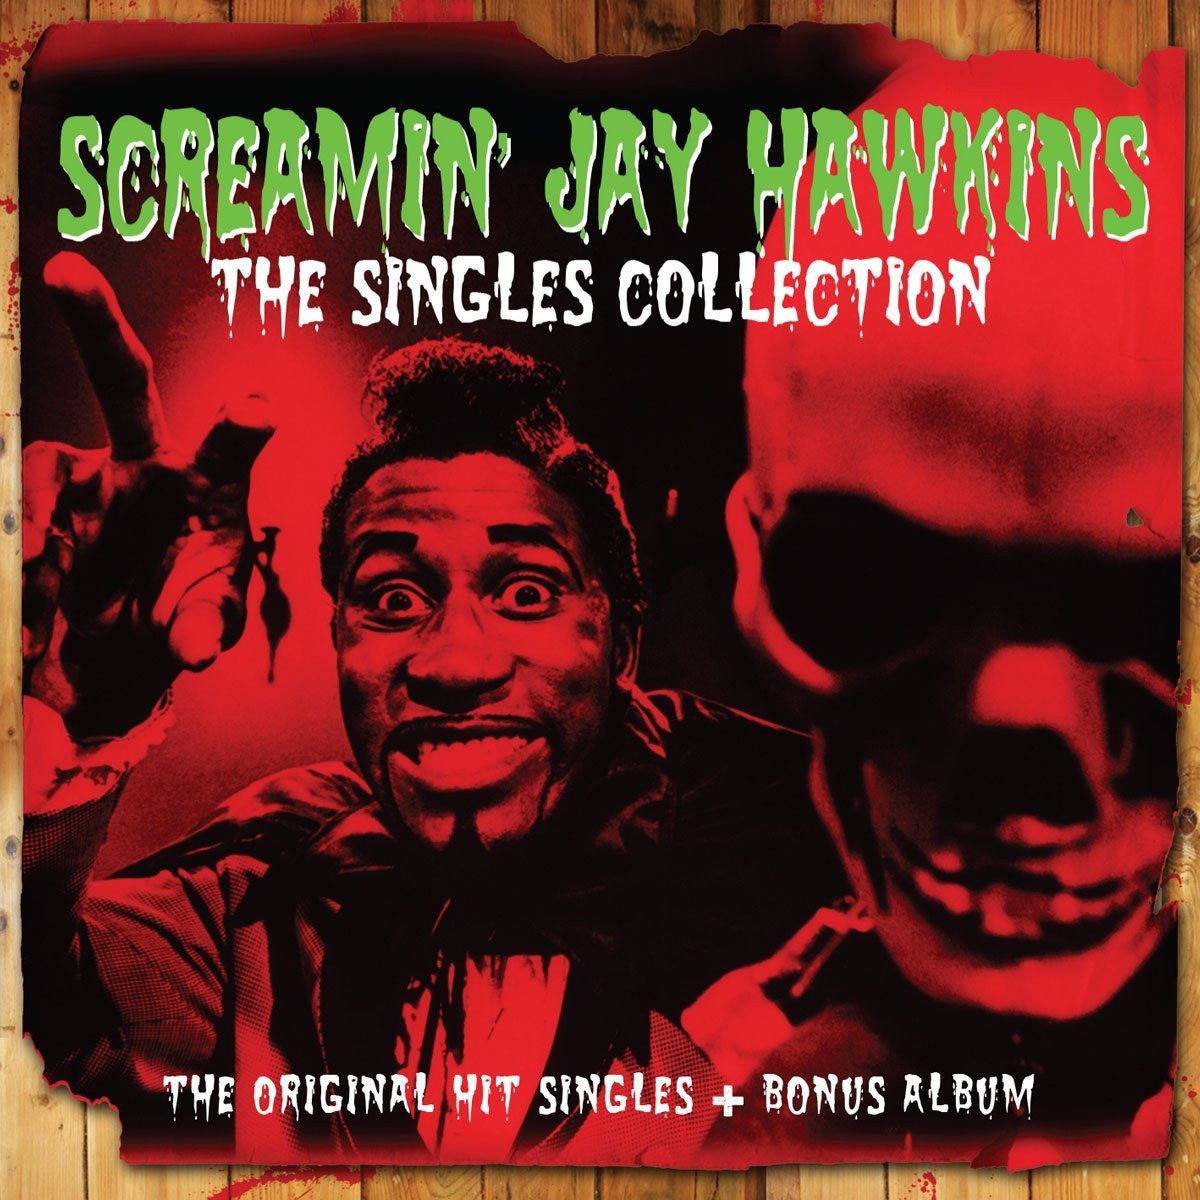 Screamin' Jay Hawkins: The Singles Collection (2 CDs)